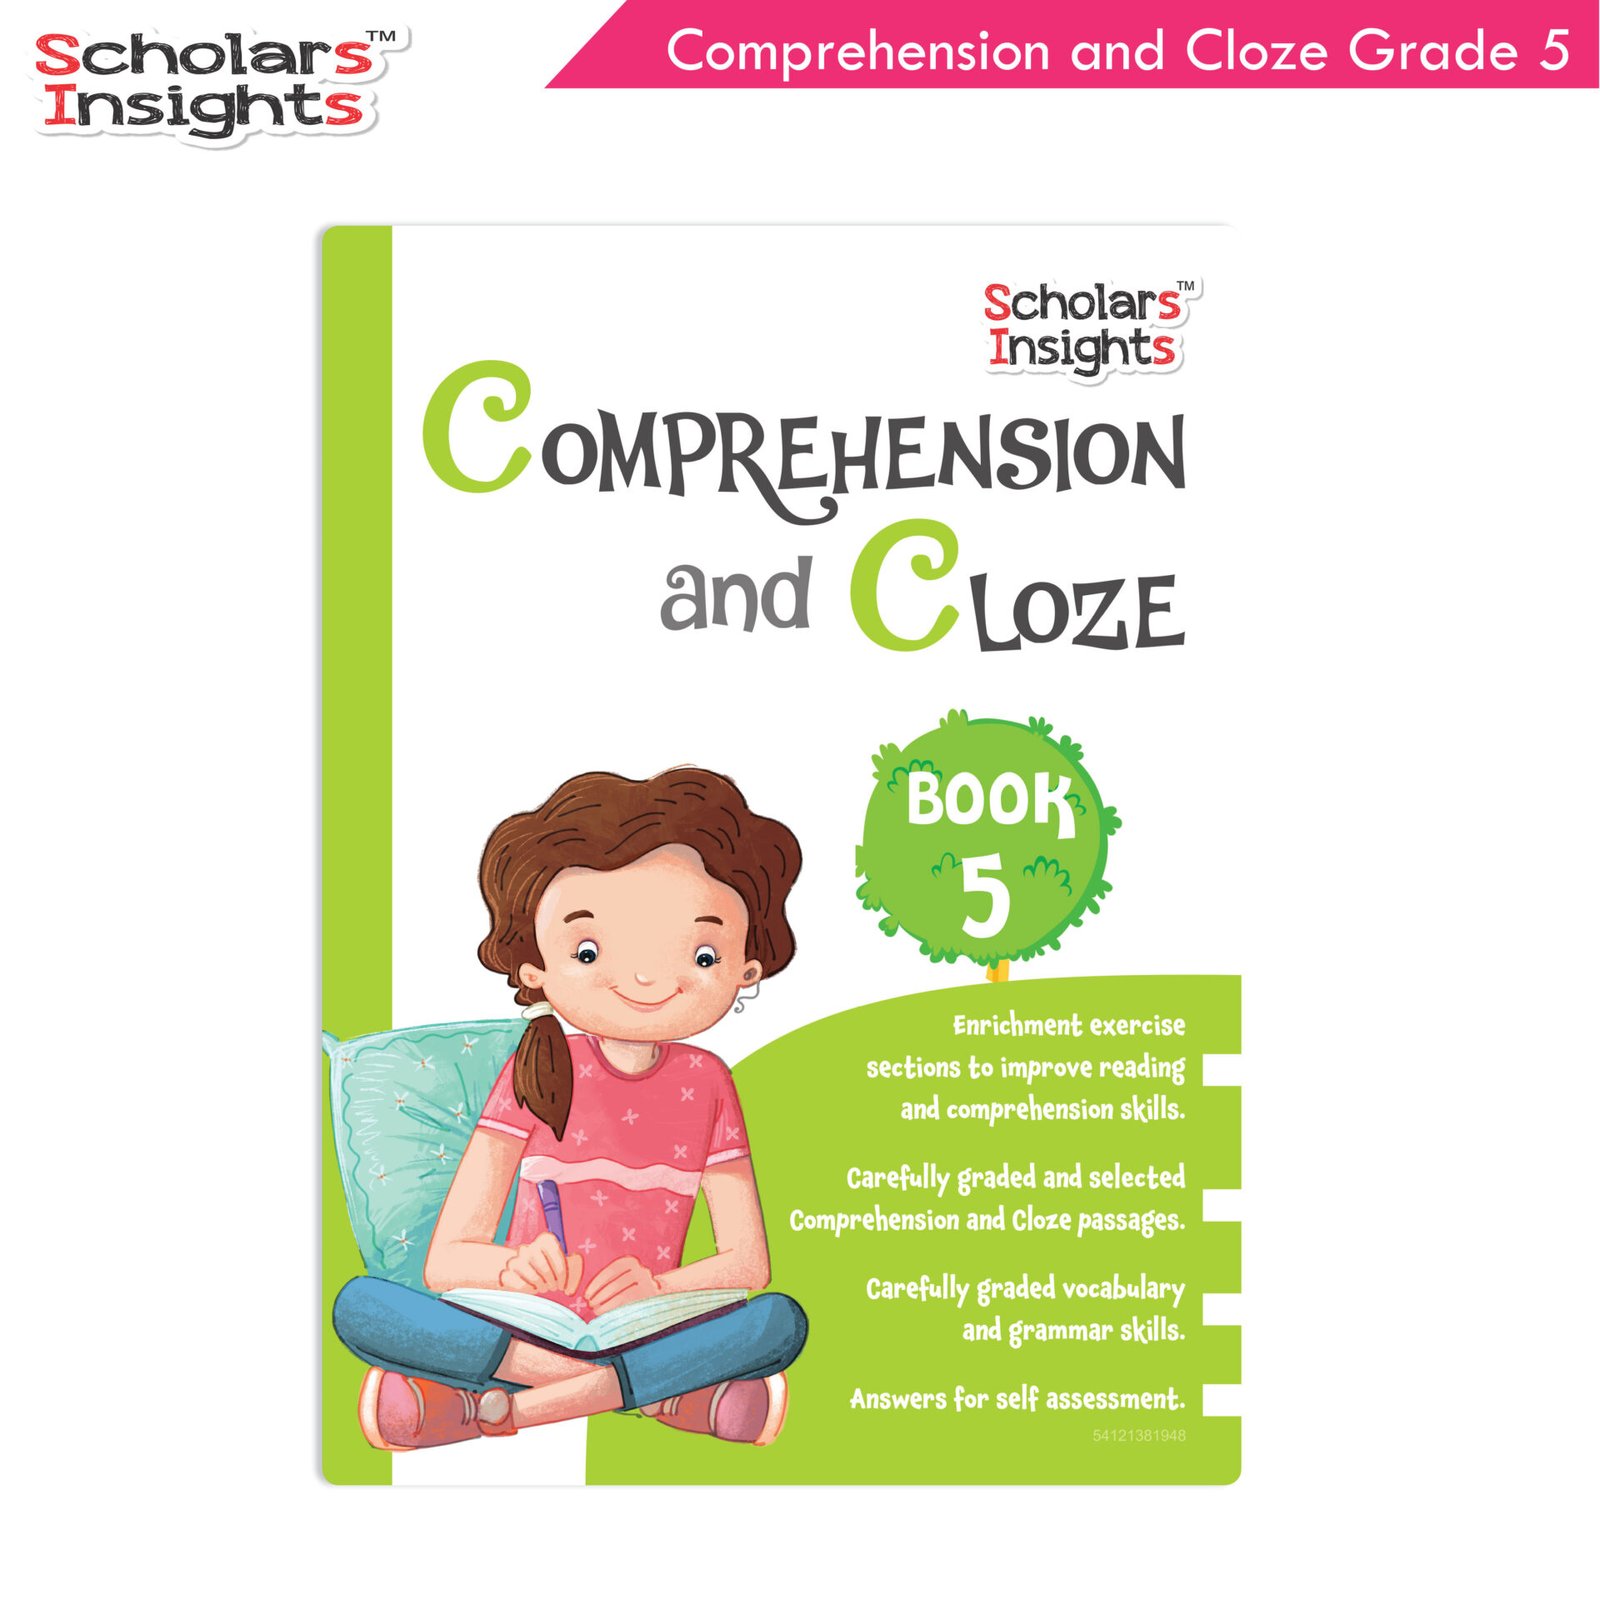 Scholars Insights Comprehension and Cloze Grade 5 1 1